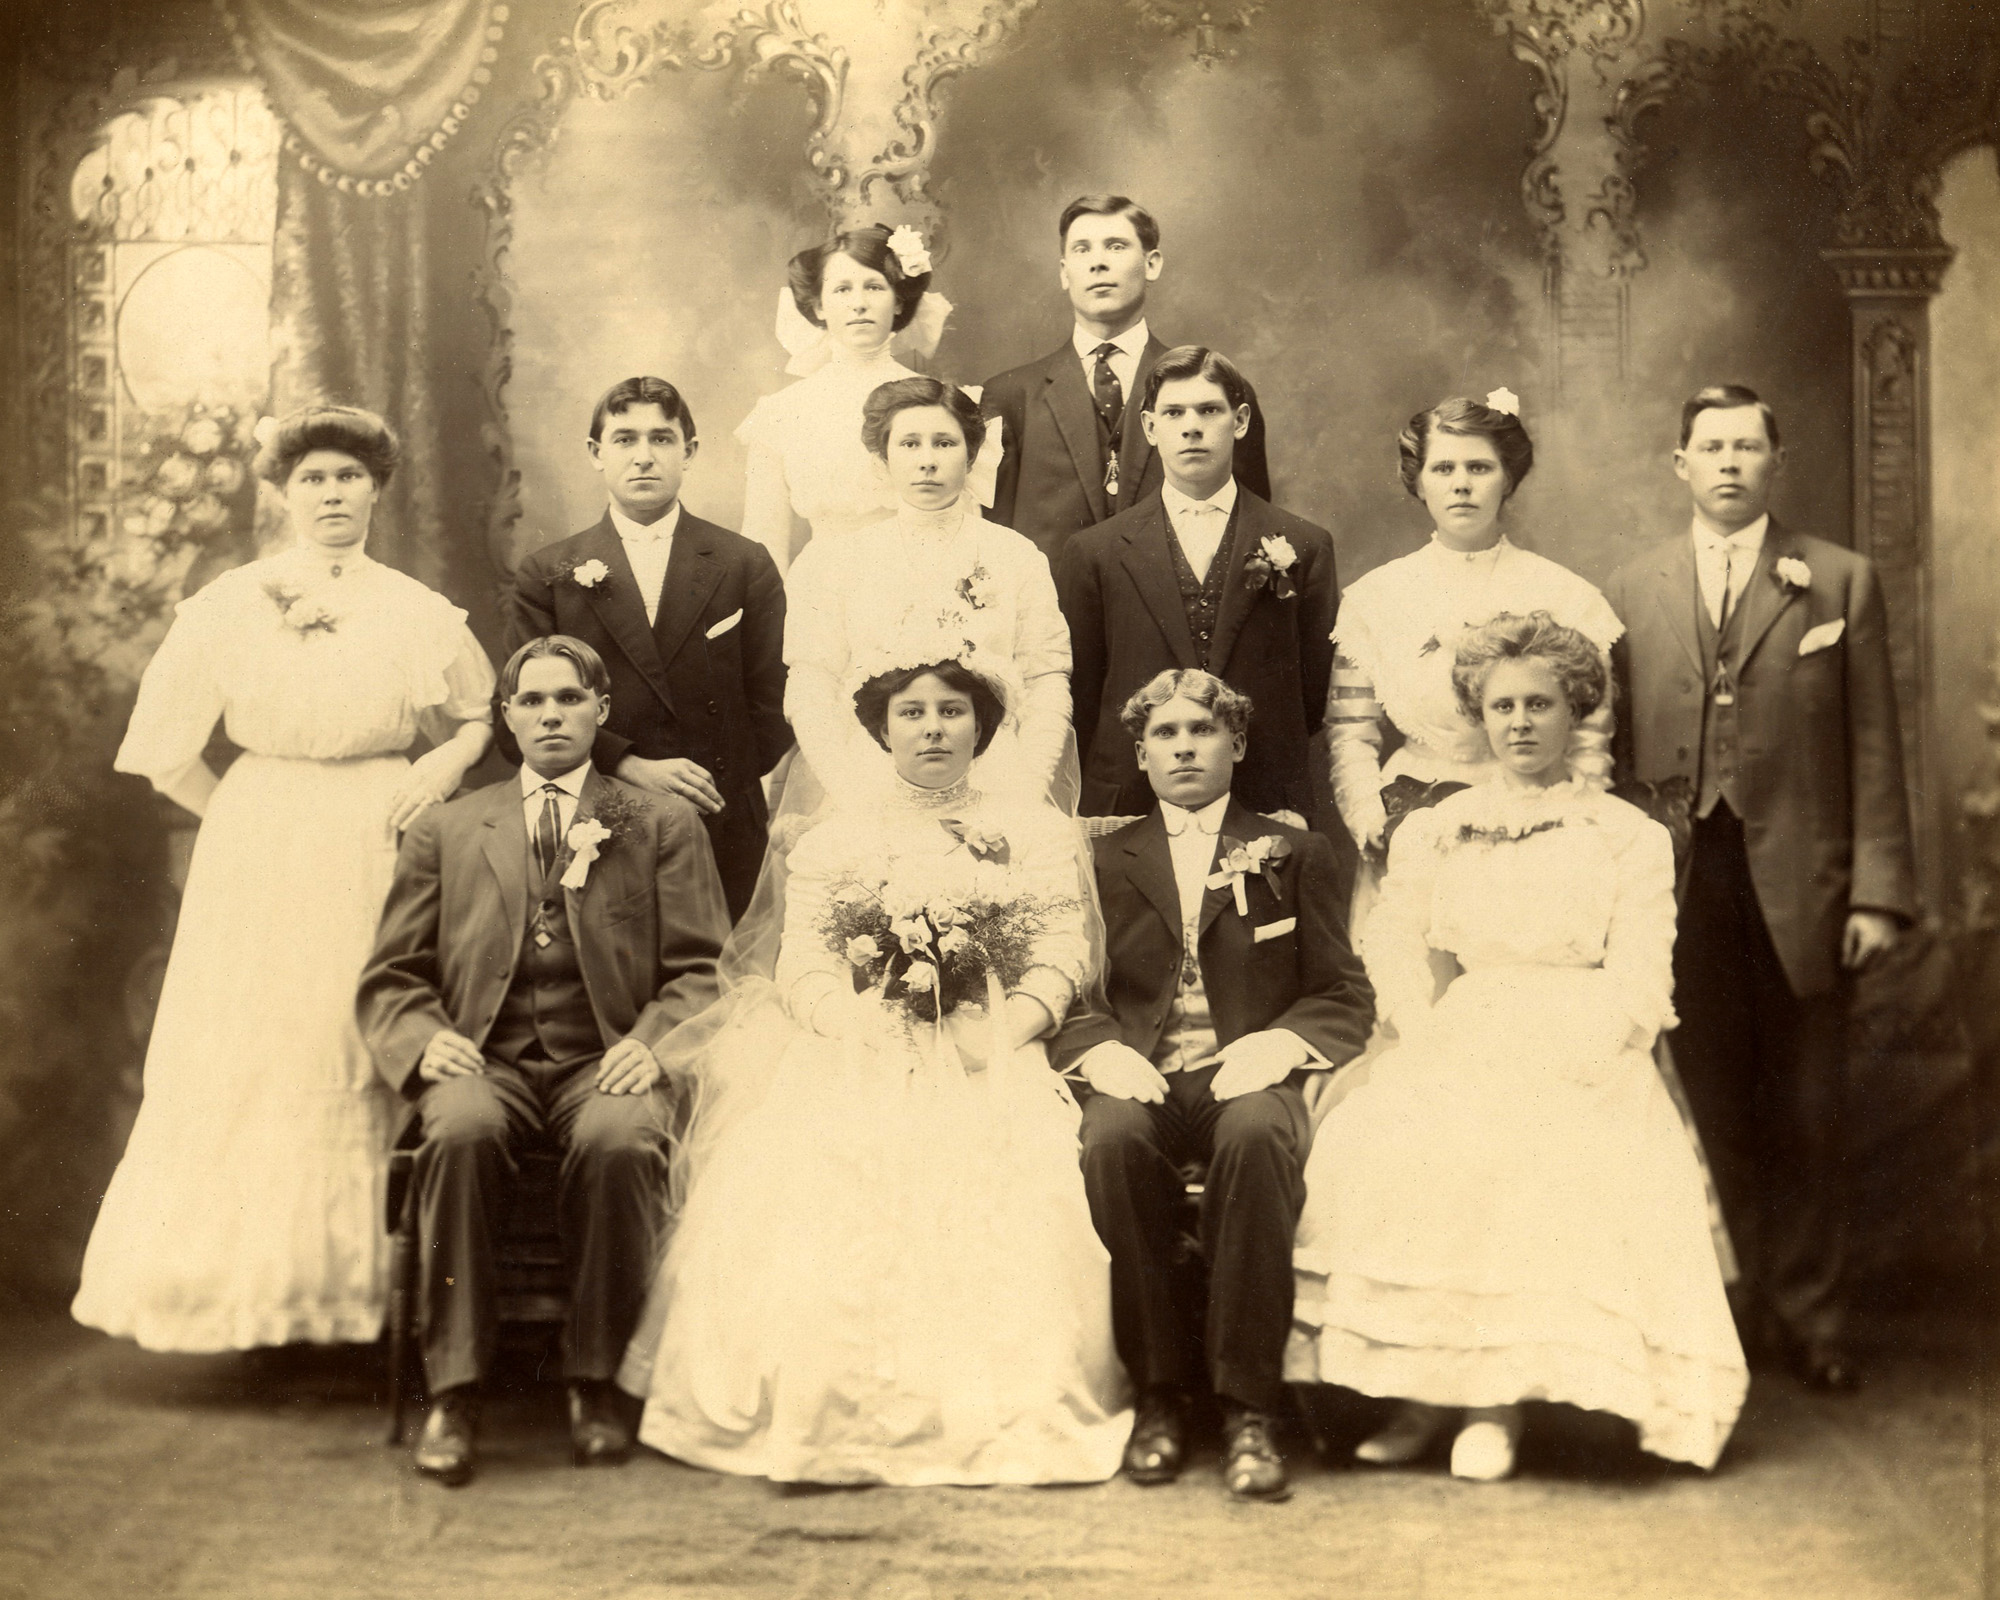 Lithuanian-American wedding. Anthony Willen married Mary Sidlewicz April 24th 1910 in Brockton, Mass. View full size.

[Relatives of yours? -tterrace]